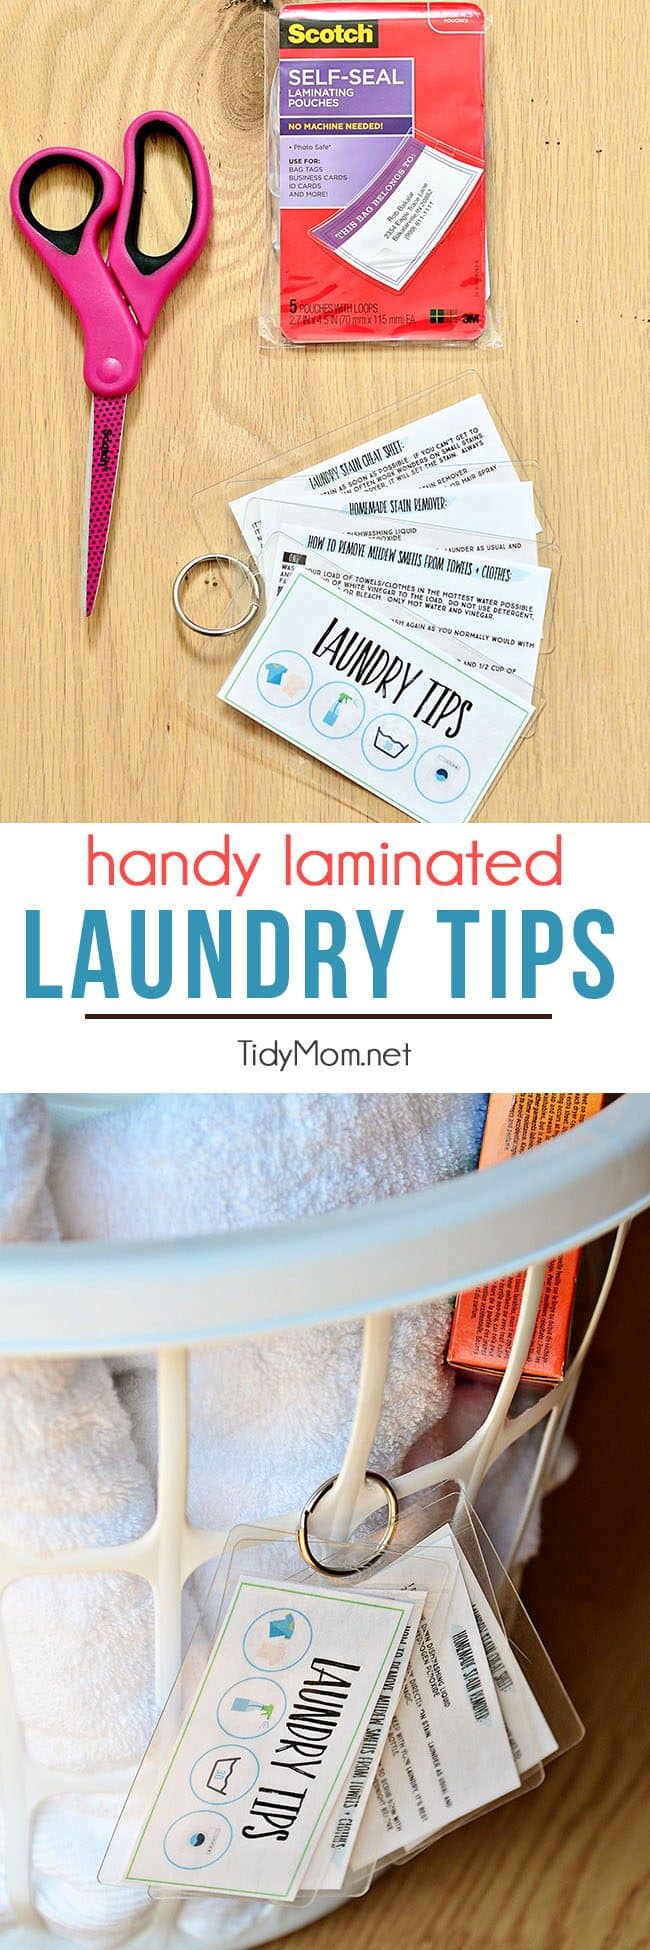 Keep these handy laminated laundry tips at your fingertips. Download and print for free, keep on a ring to hang on basket or on a hook in the laundry room. Use Scotch Self-Seal Laminating pouches and Free Printable Laundry Tips at TidyMom.net